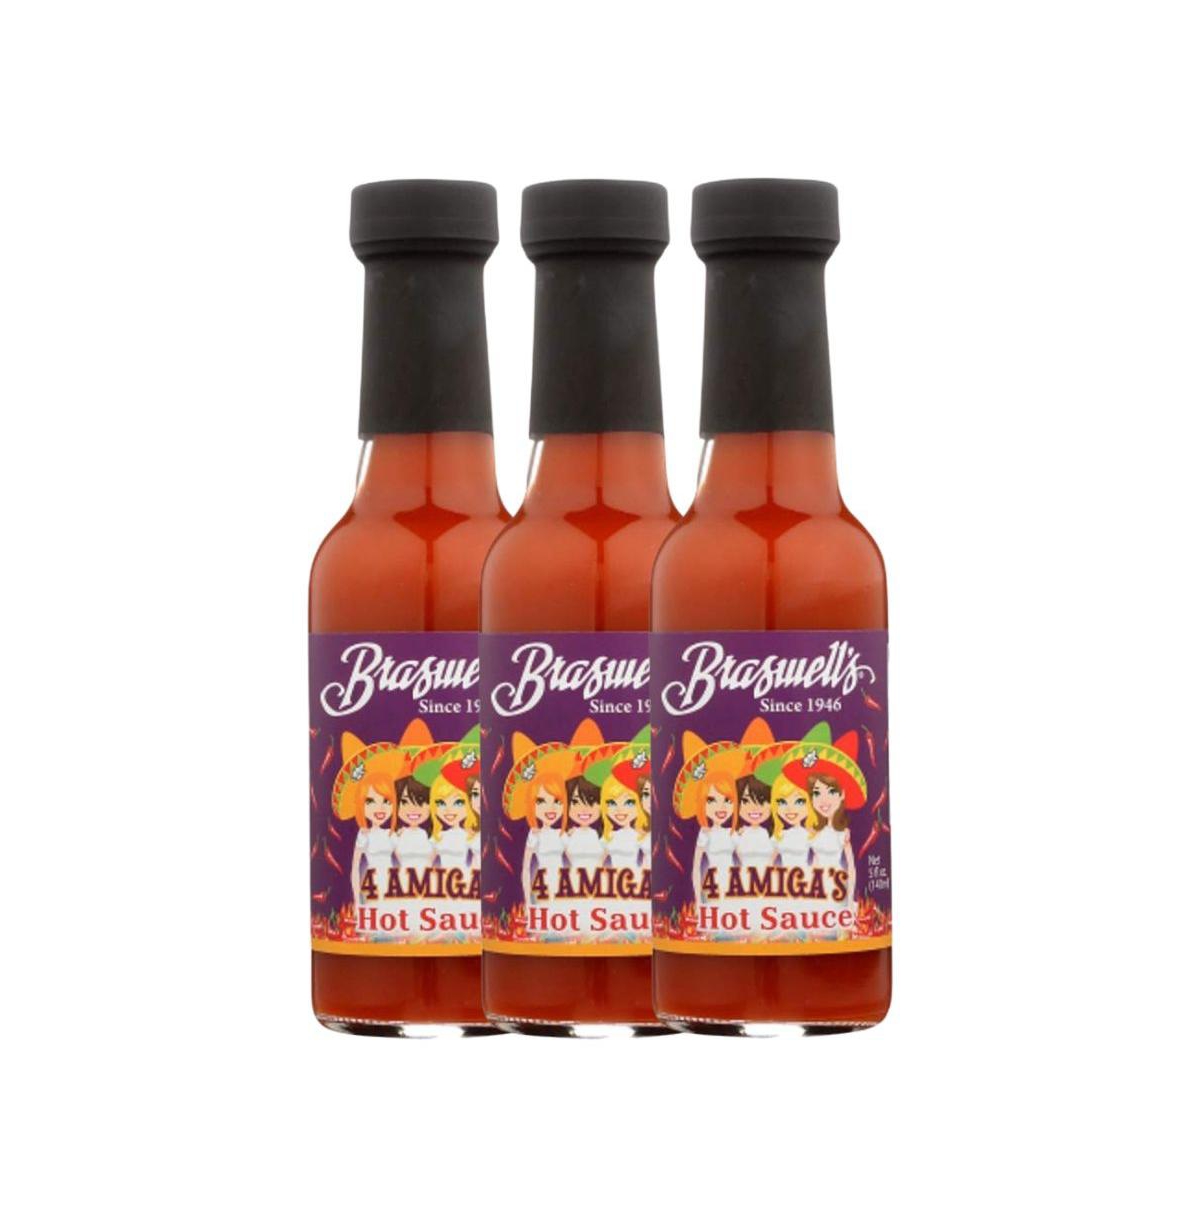 Braswells Four Amigas Hot Sauce with Mild Heat 5 oz (3 Pack)